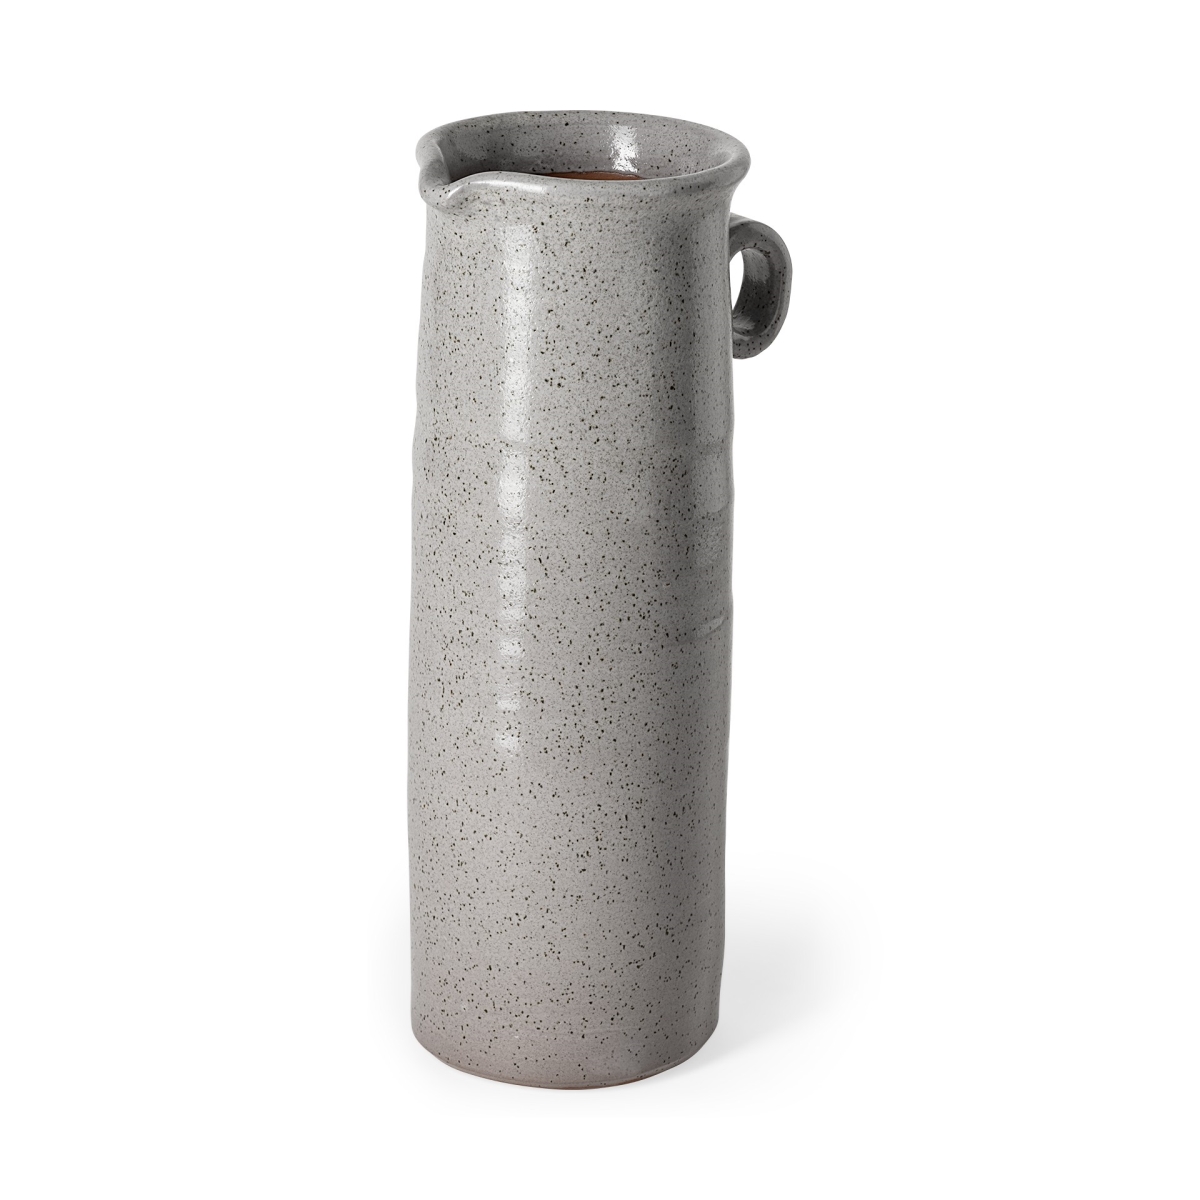 Picture of HomeRoots 392213 12.20 x 4.52 x 6.10 in. Tall Gray Speckle Decorative Ceramic Jug